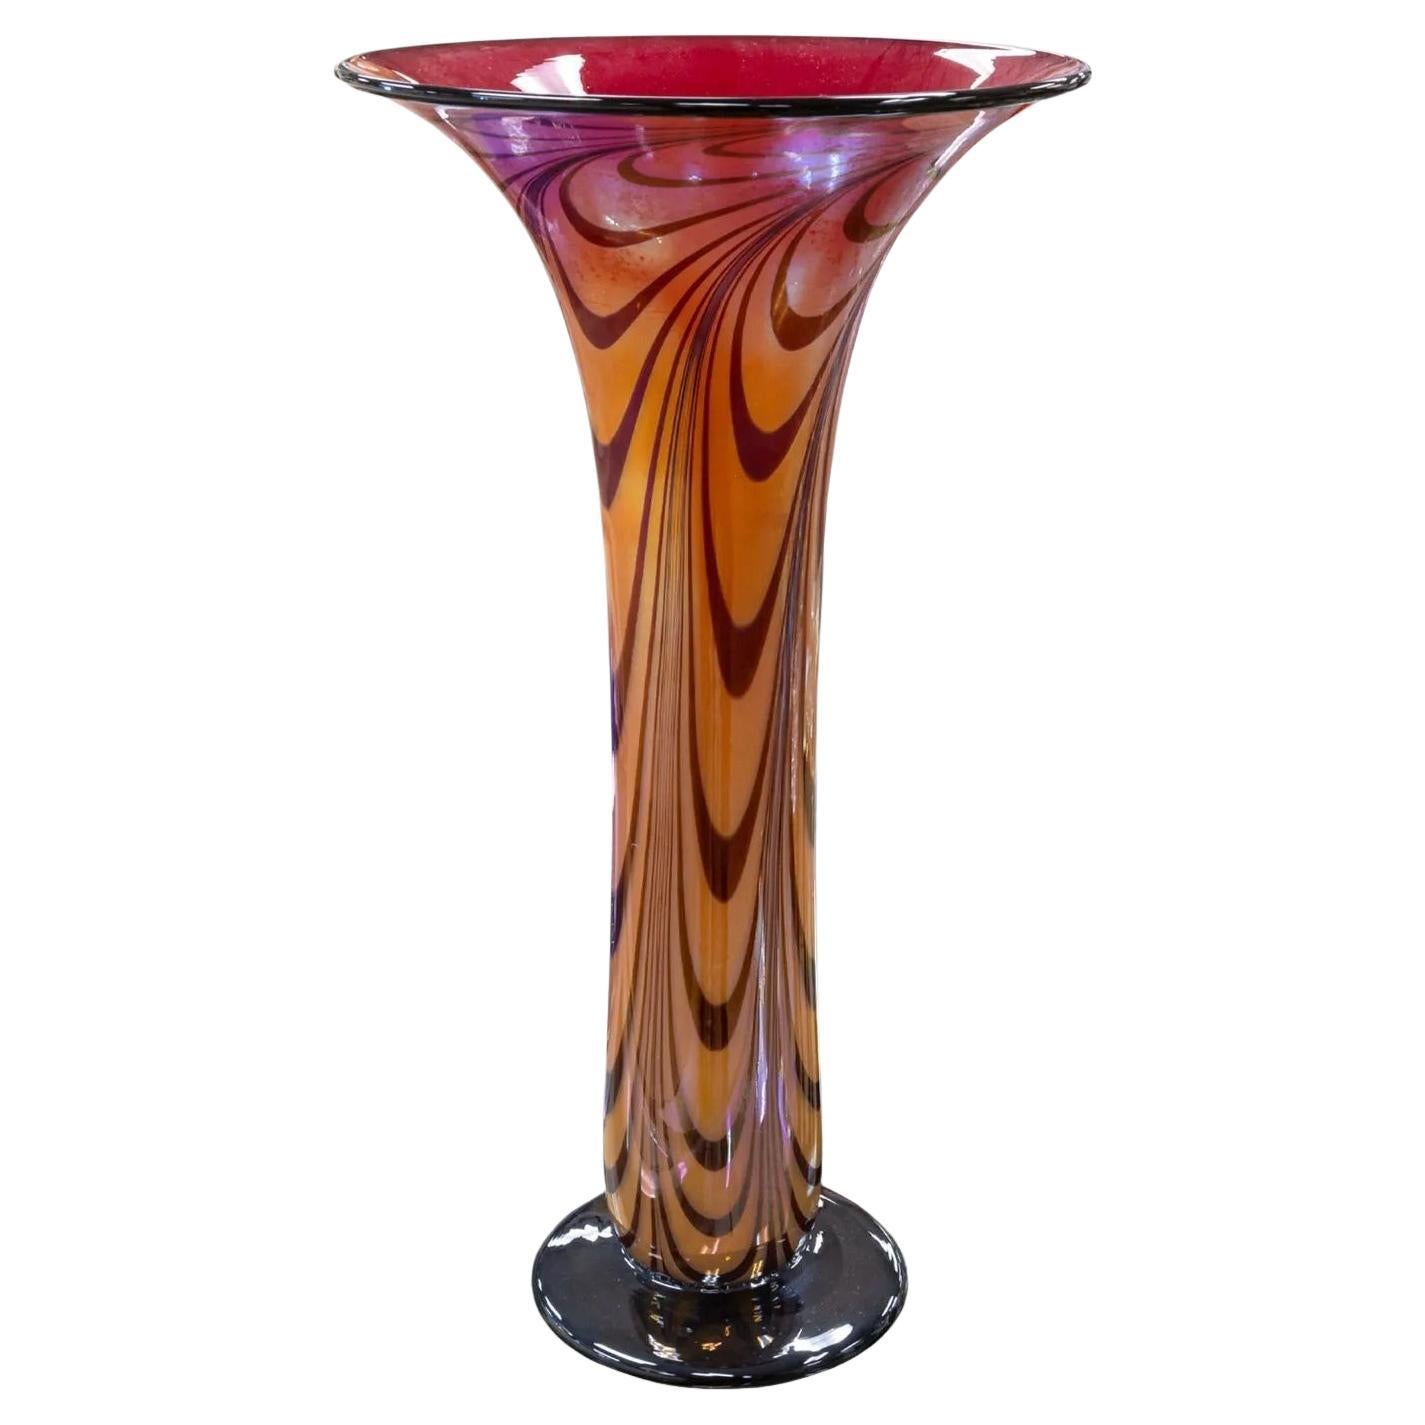 Kjell Engman "Fidji" Signed and Dated 1992 Orange Red and Black Blown Glass Vase